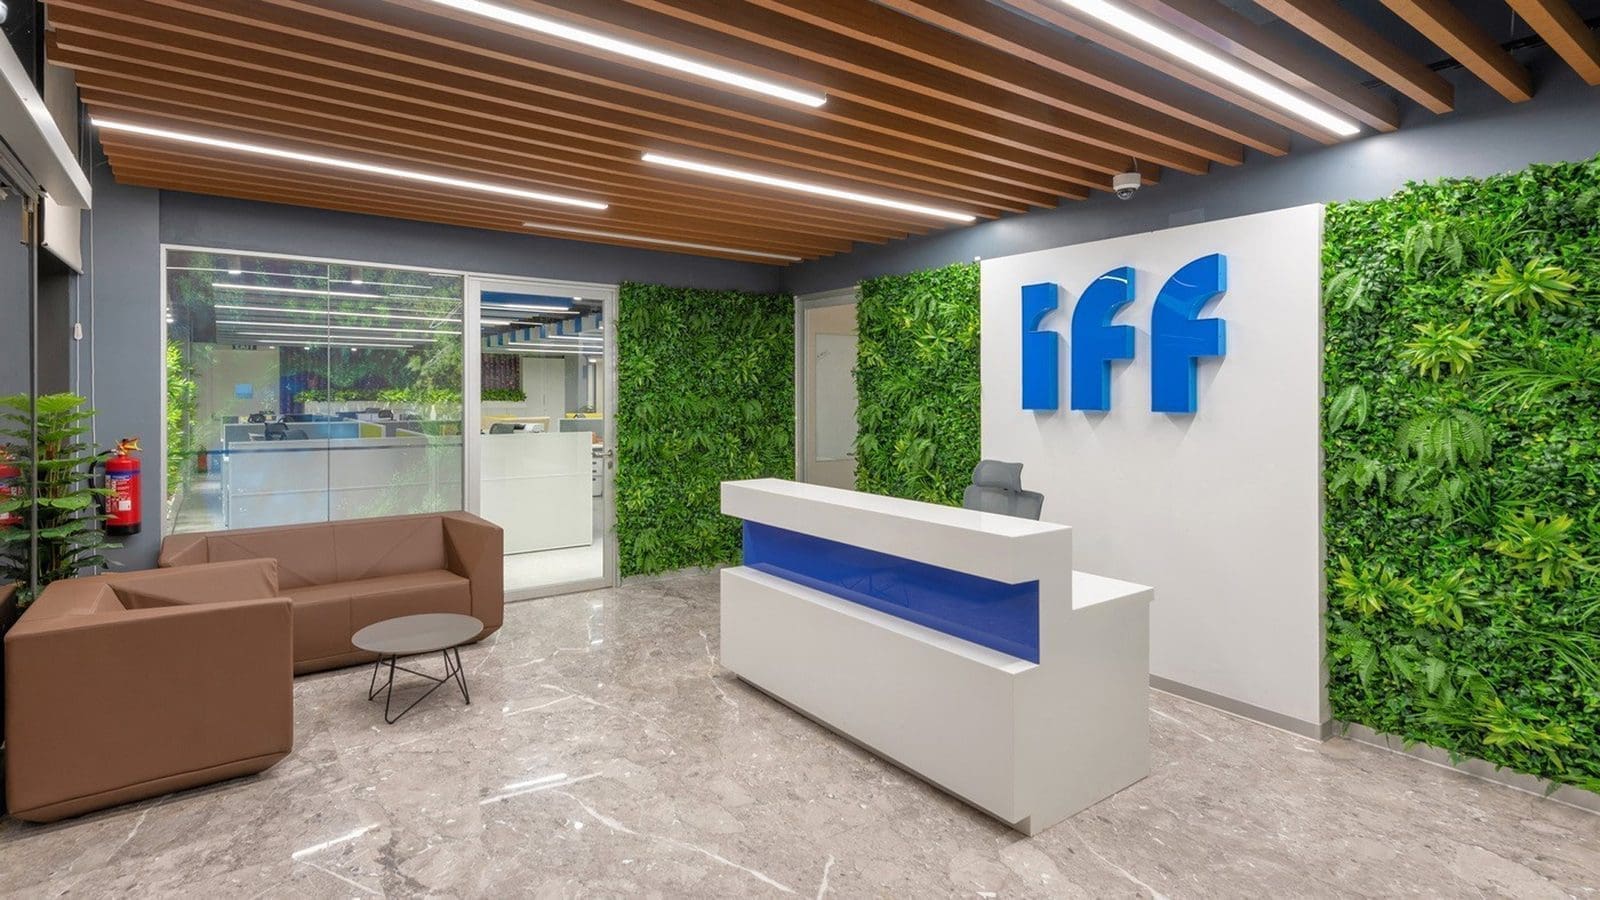 IFF plans for comprehensive business restructuring to reduce costs